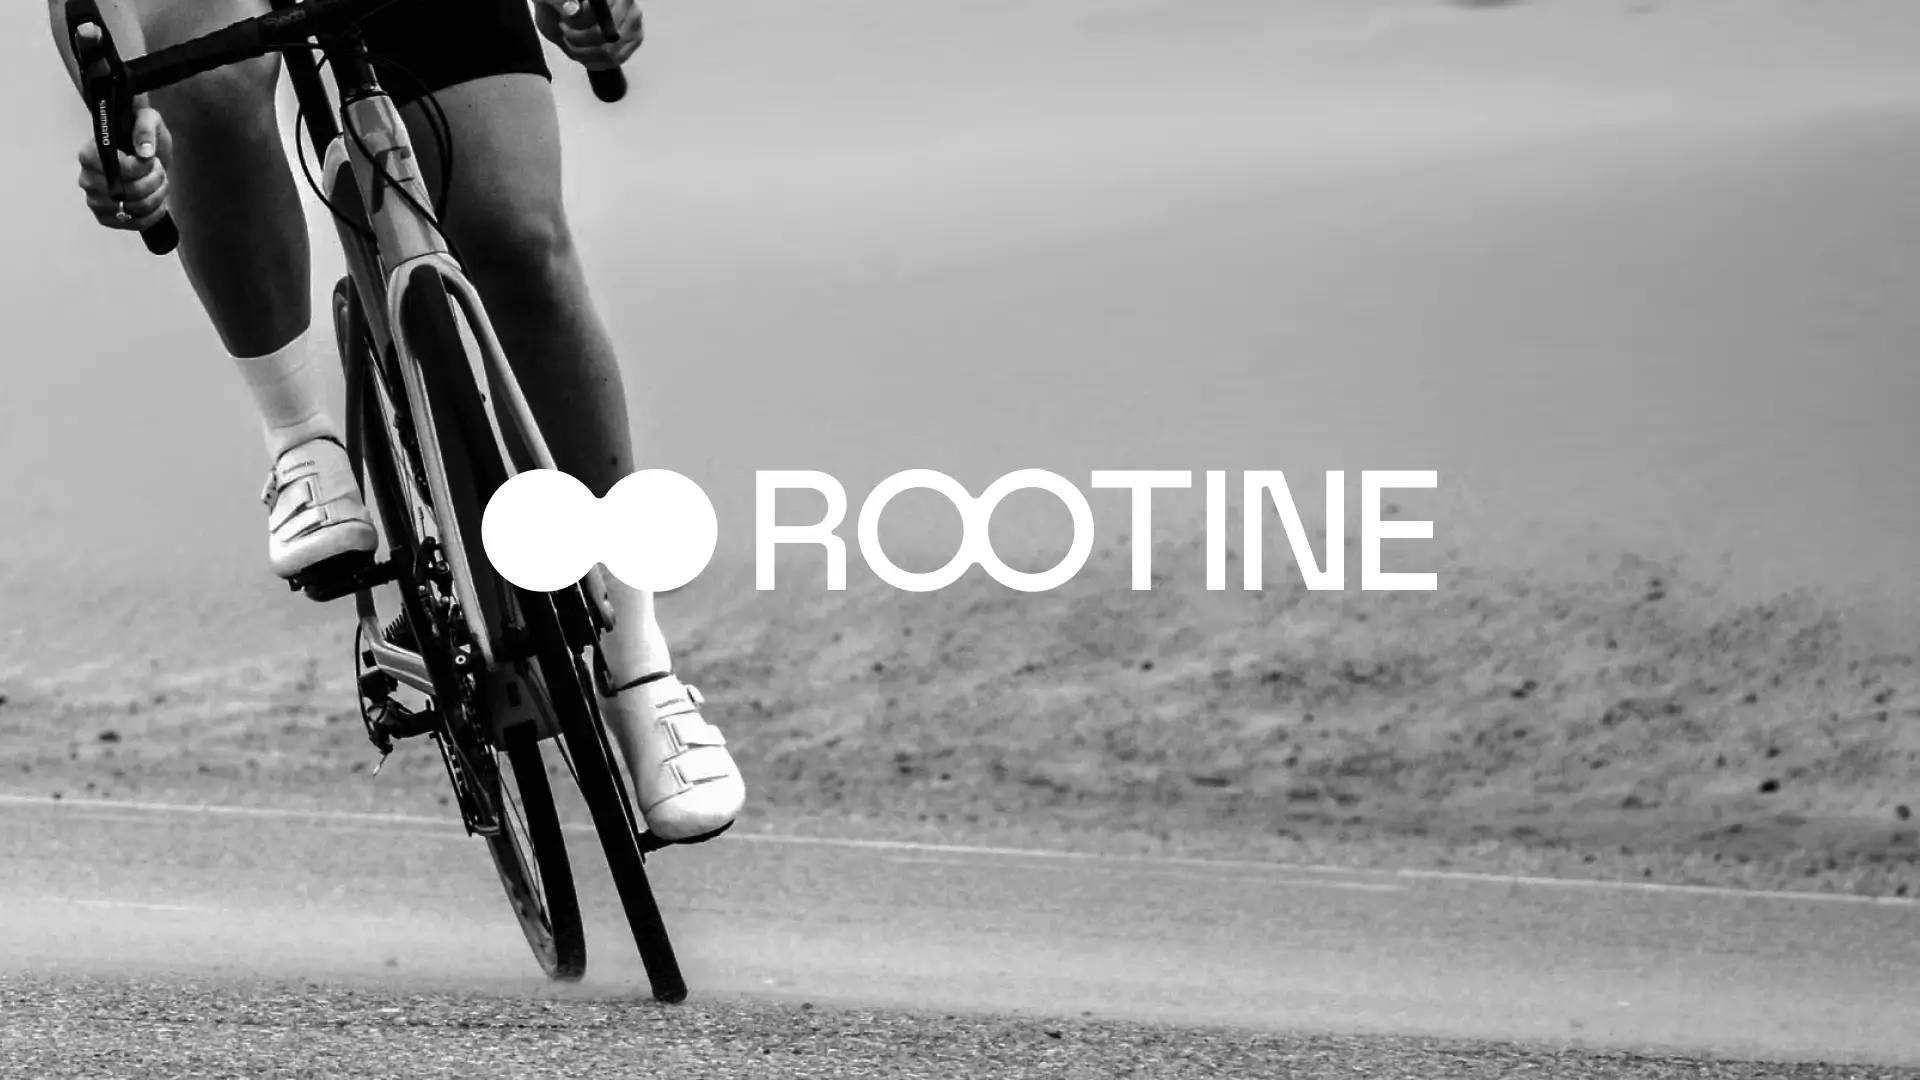 Black and white image of cyclist with Rootine logo